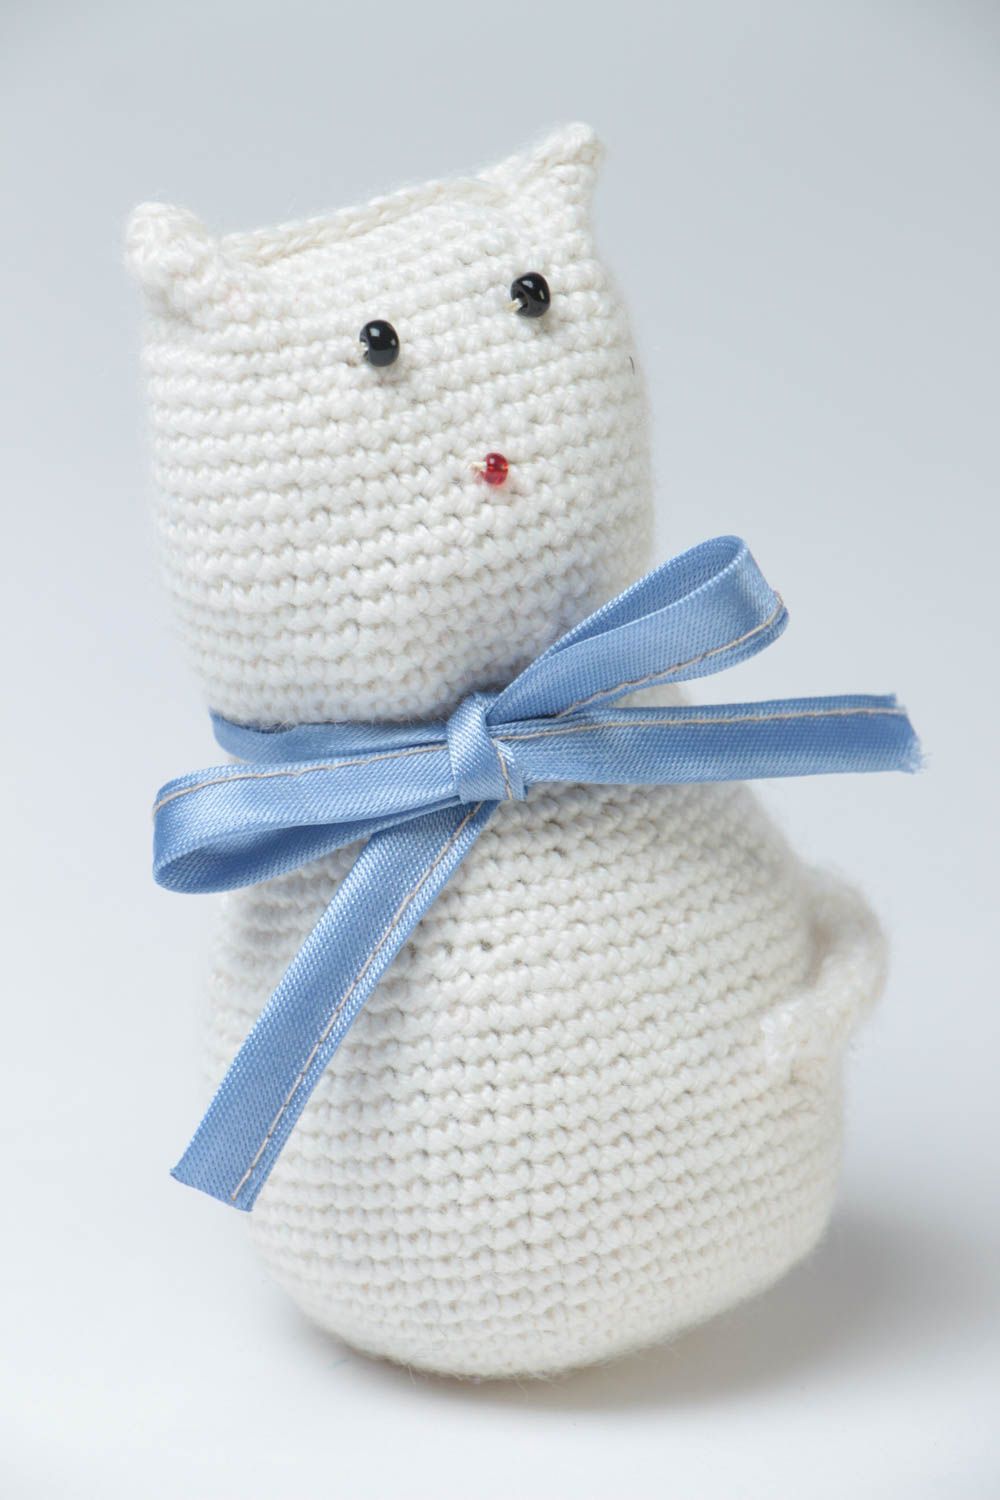 Hand-crocheted cat toy handmade soft toy stuffed toys for children home decor photo 2